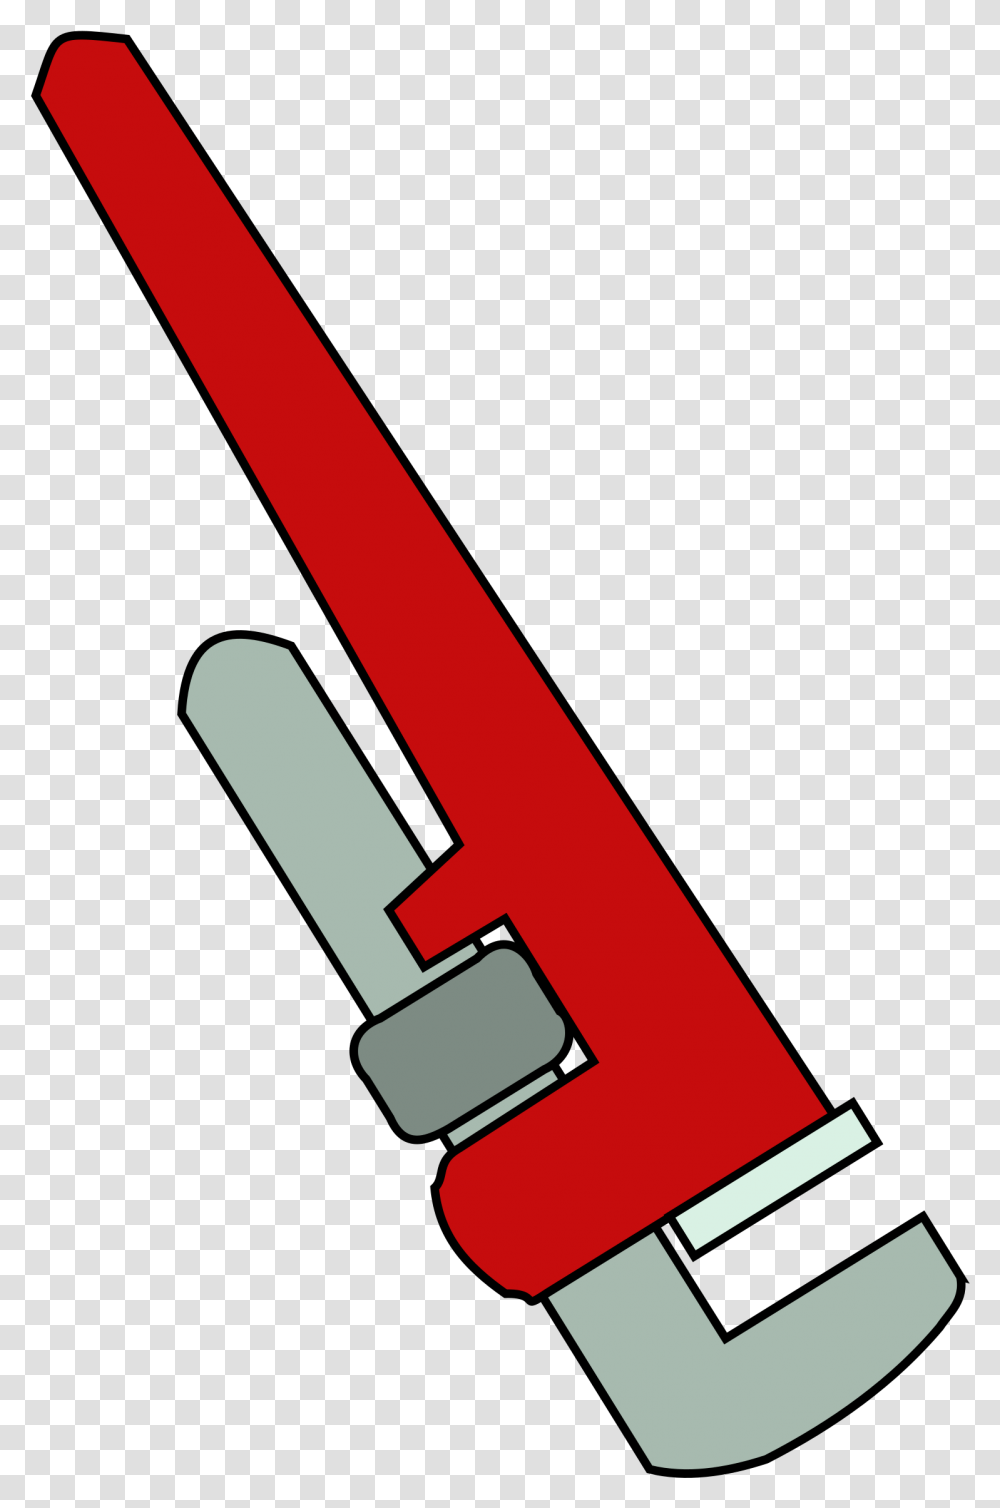 Anglelinepipe Wrench Blue Pipe Wrench Clipart, Cushion, Lighter, Tool Transparent Png